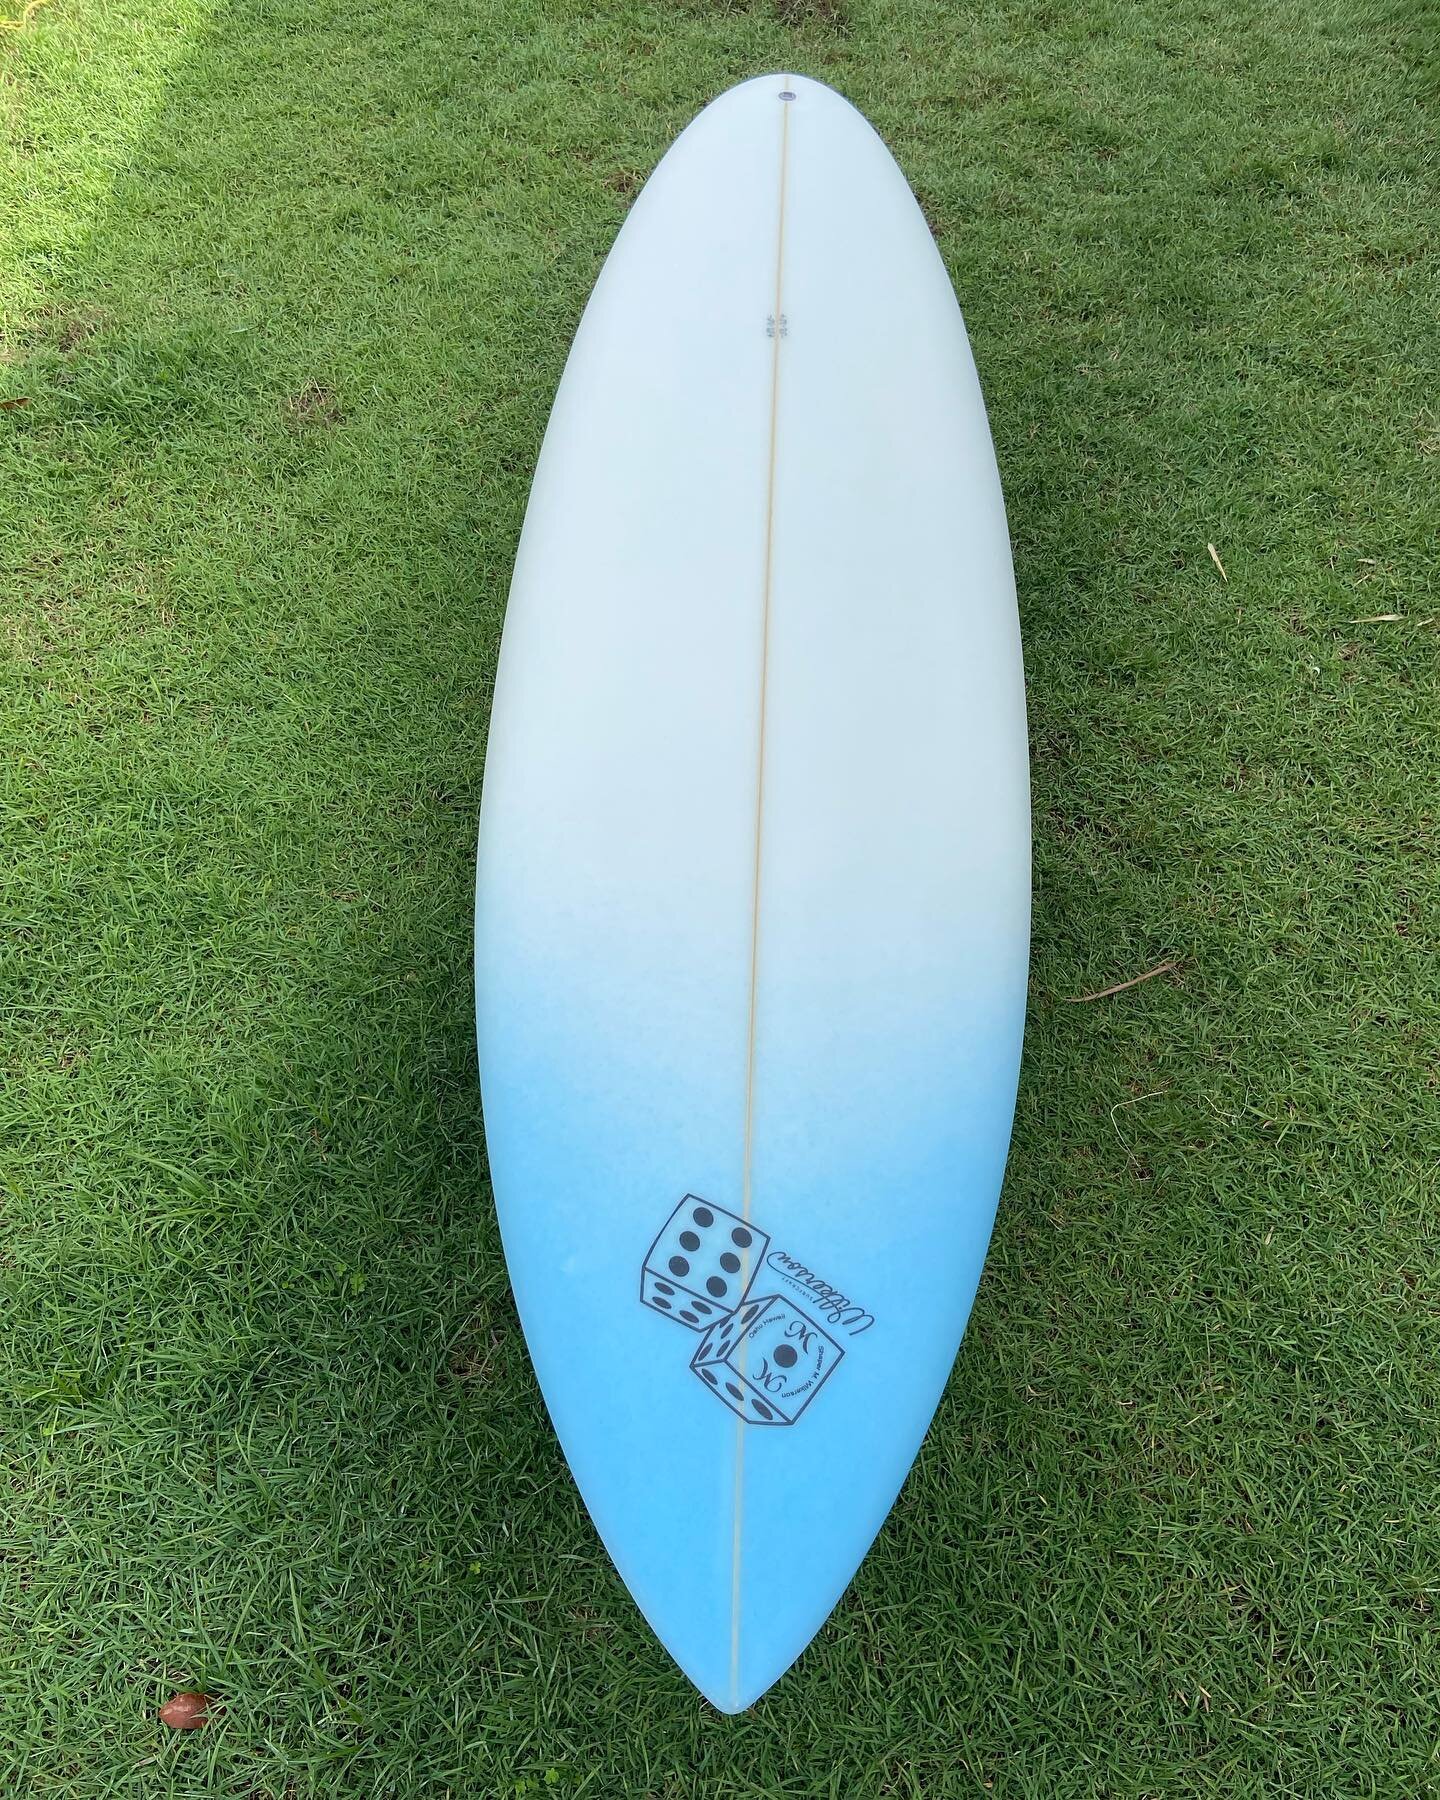 6&rsquo;6&rdquo; &bull;21 &bull; 2 ⅞ &bull; #custom #handshape for Neil C. , we shaped this board with a flat deck, single to double concave thru the fins and some vee off the tail, Neil spends a lot of time in Indonesia and we have made a few boards